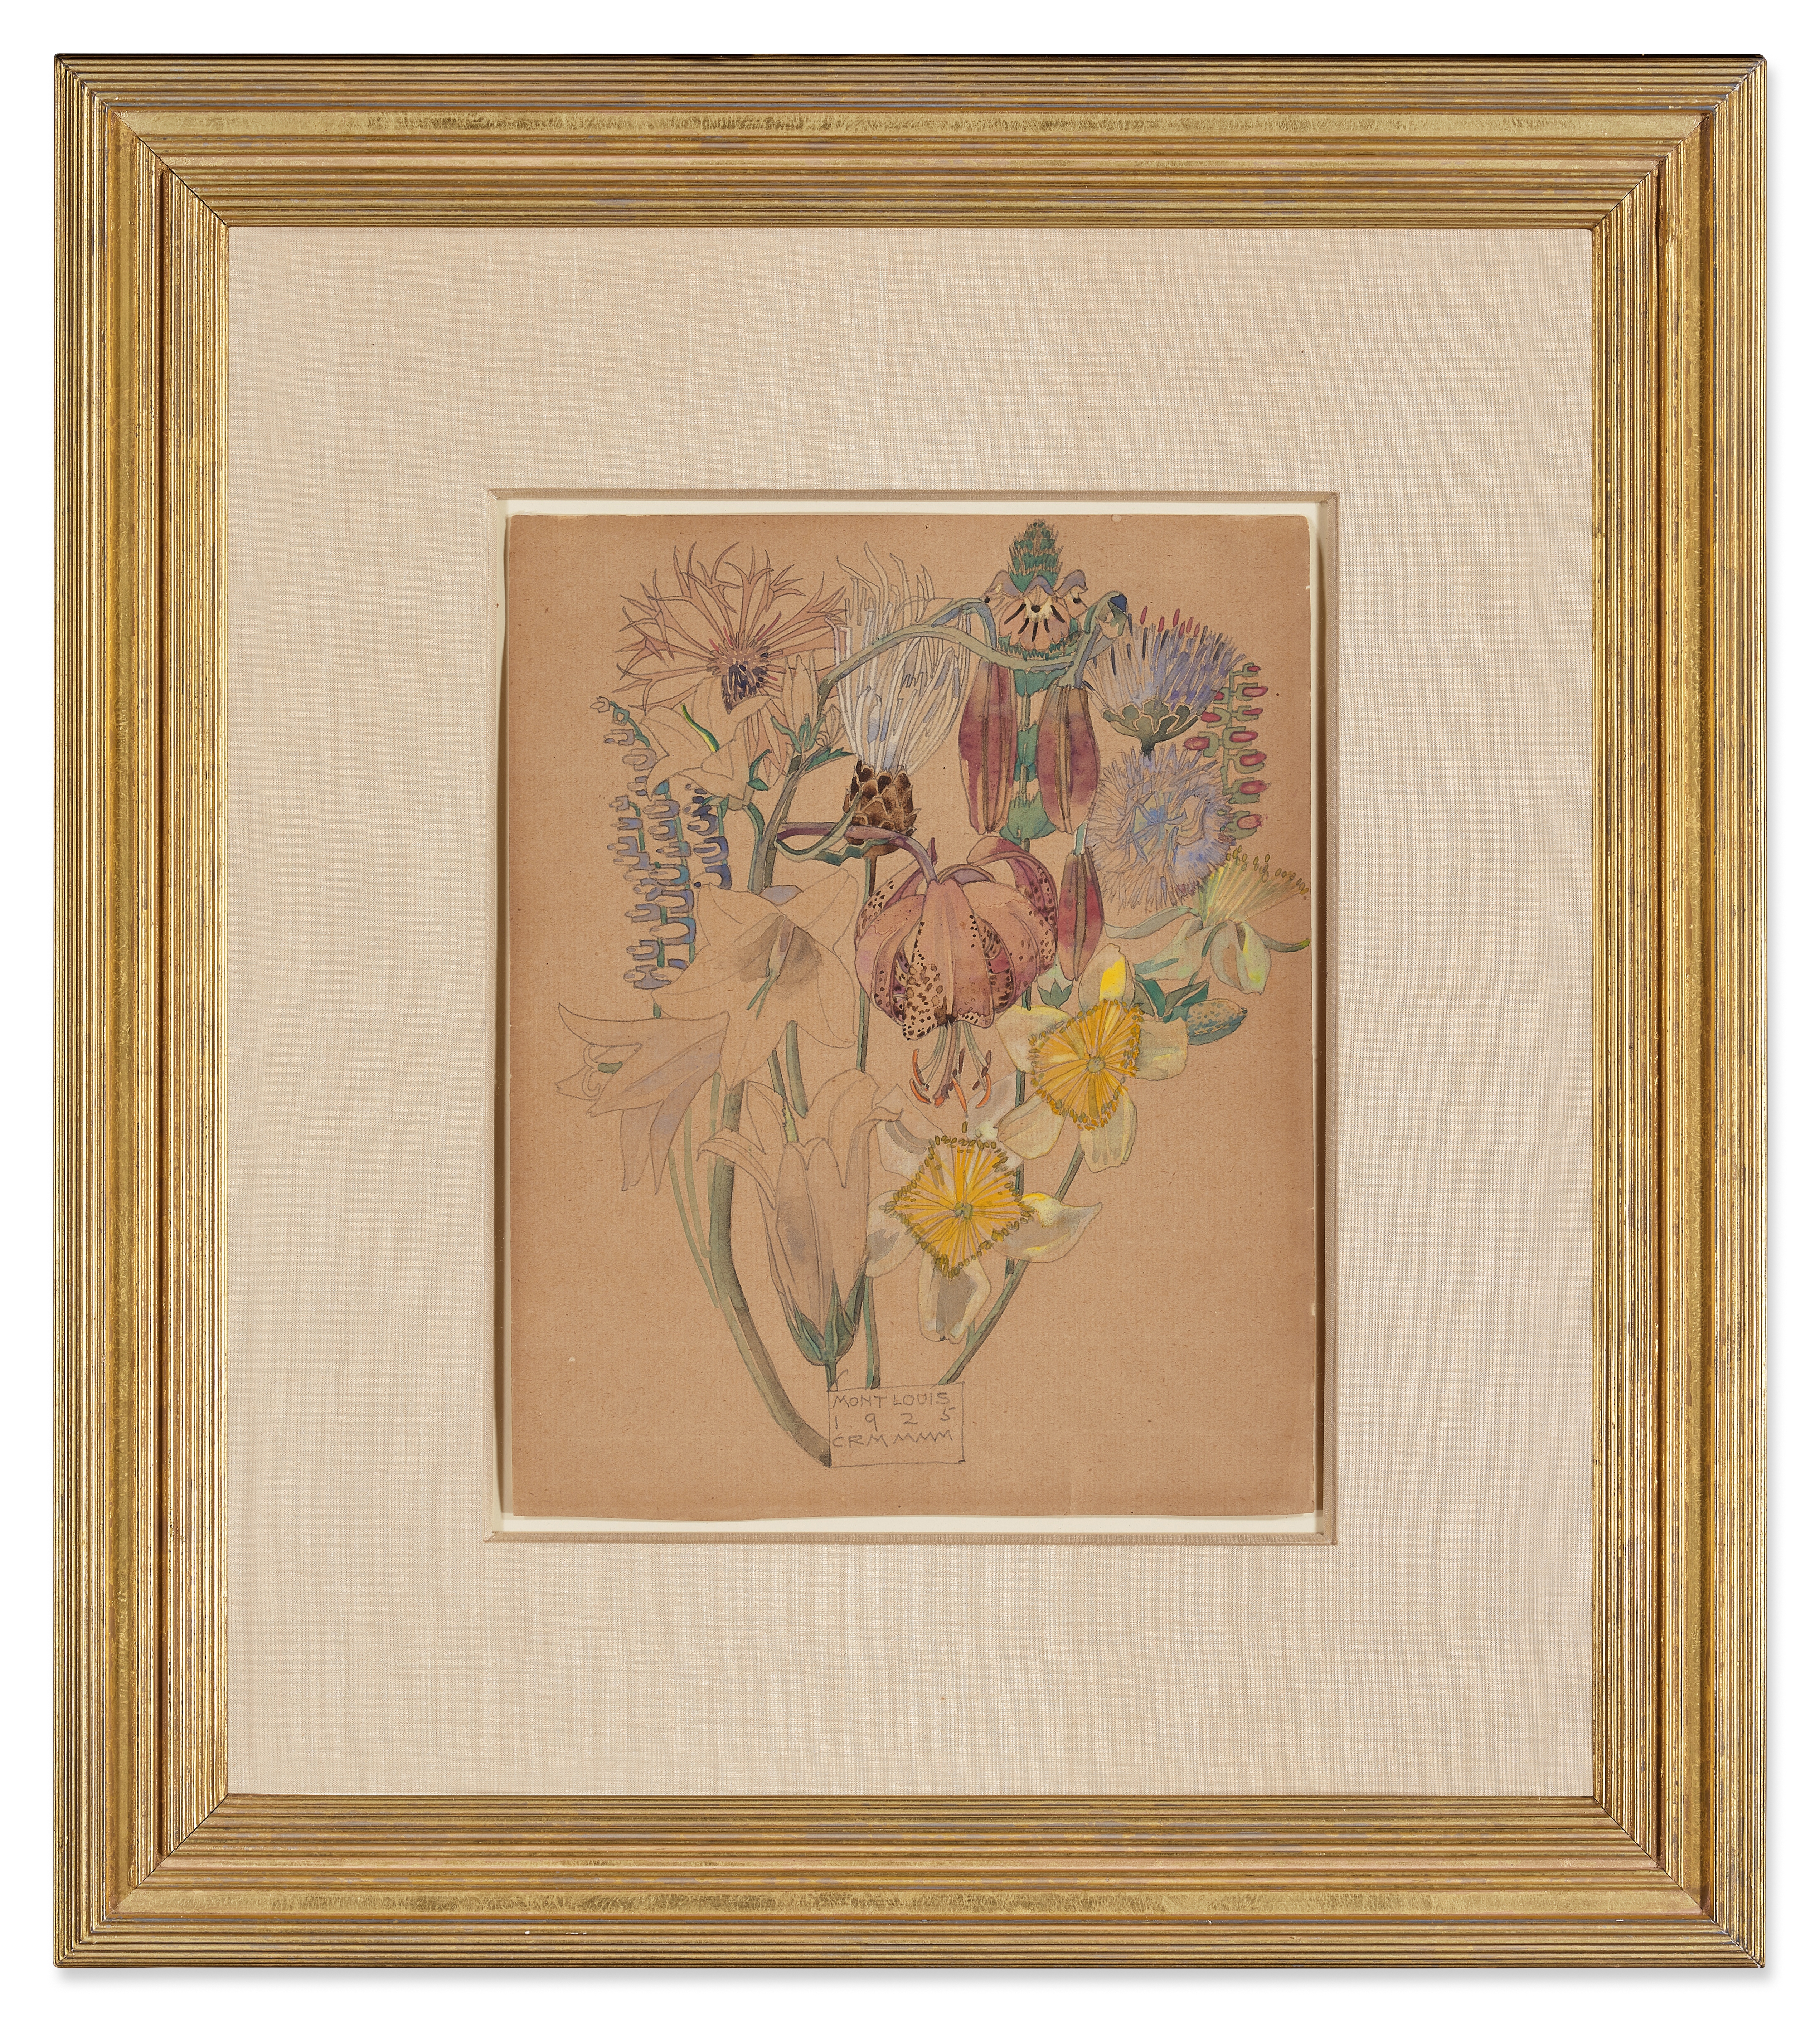 Artwork by Charles Rennie Mackintosh, Mont Louis - Flower Study, Made of pencil and watercolor on paper